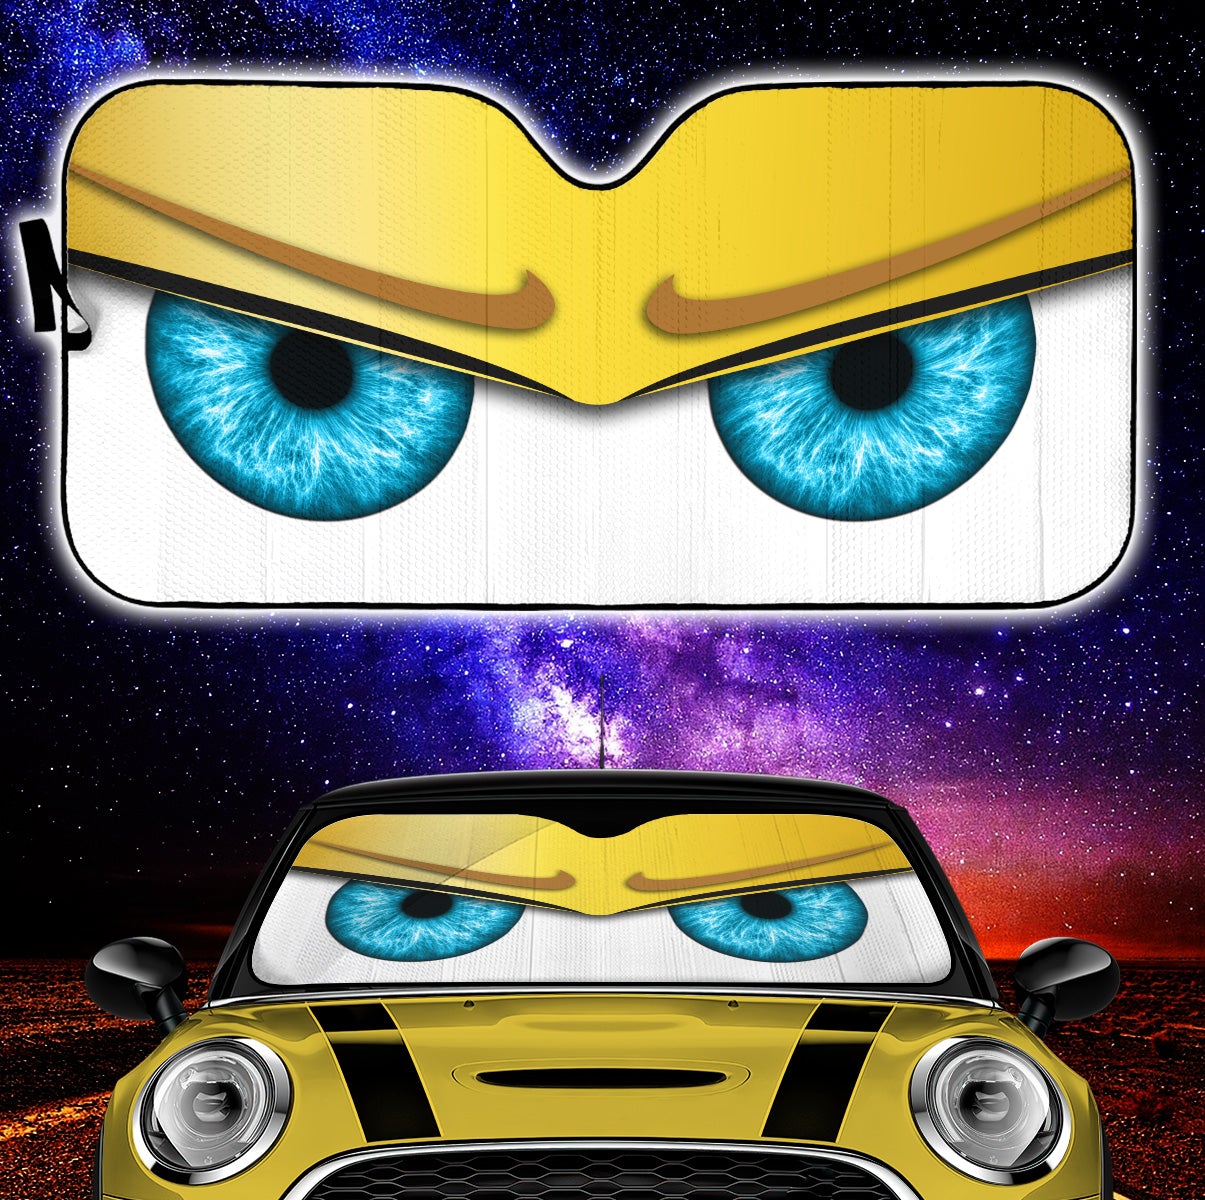 Yellow Funny Angry Cartoon Eyes Car Auto Sun Shades Windshield Accessories Decor Gift